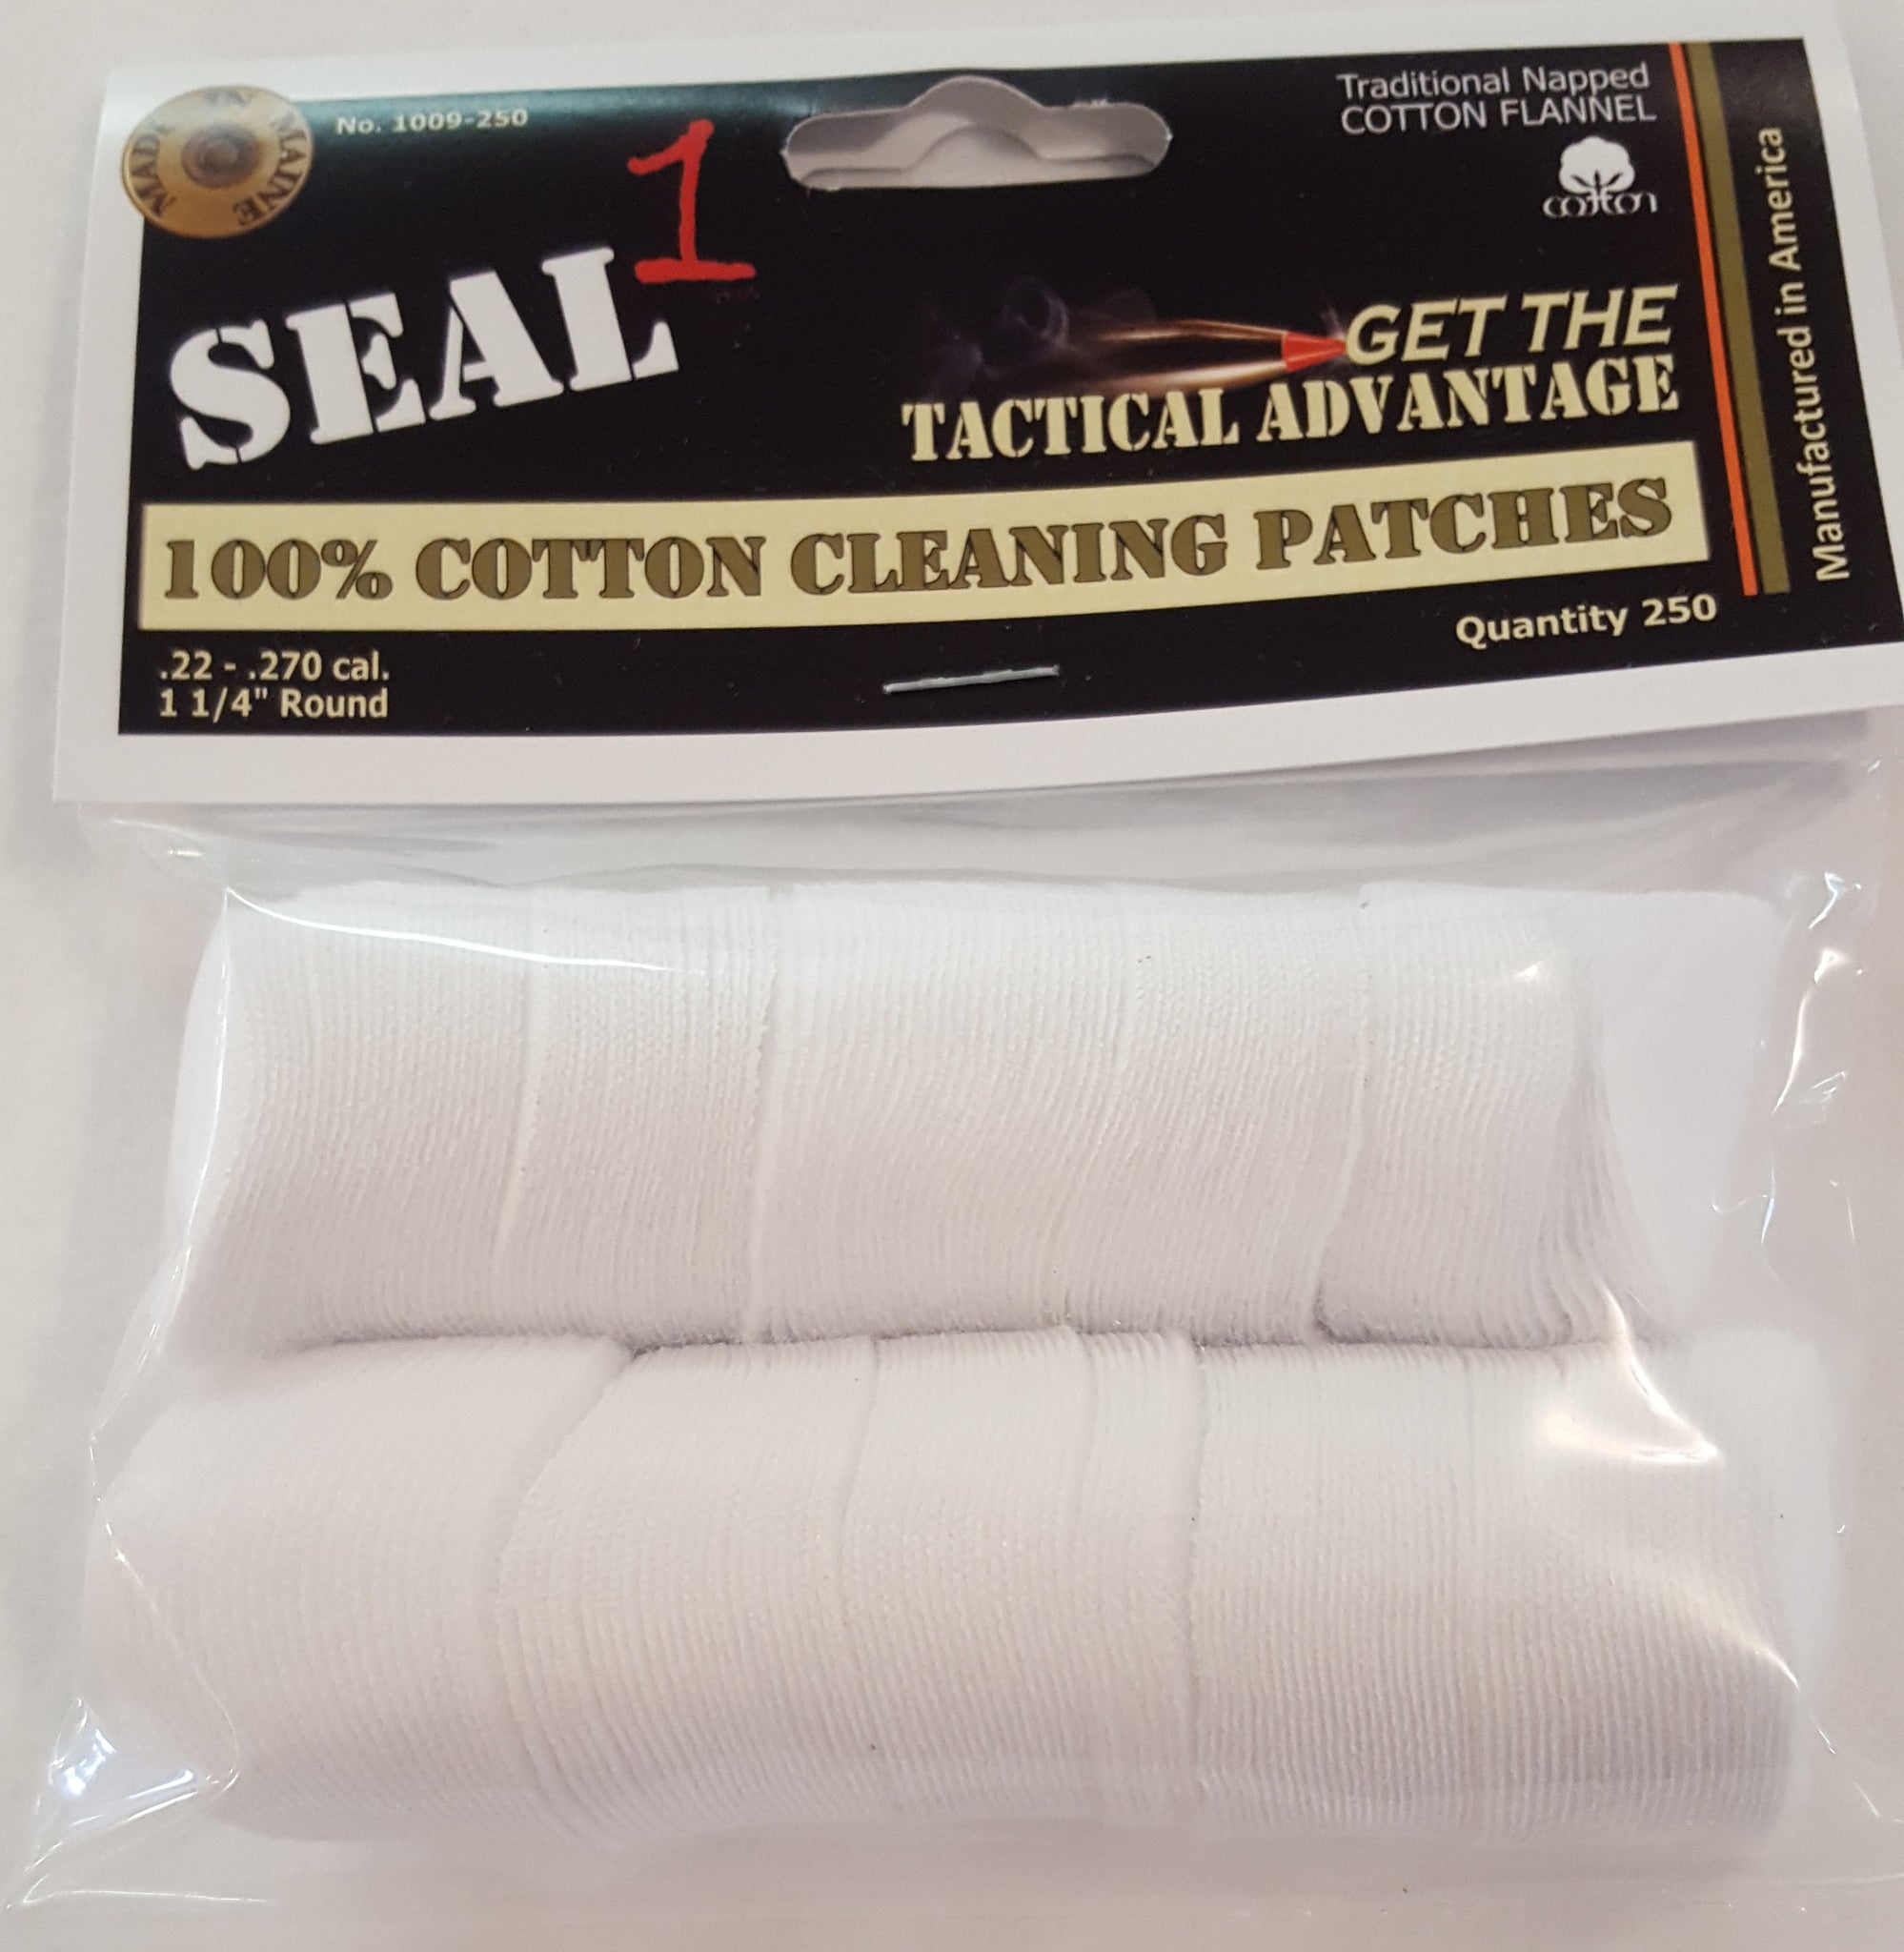 .22-.270 1 1/4" Cleaning Patches Bag of 250